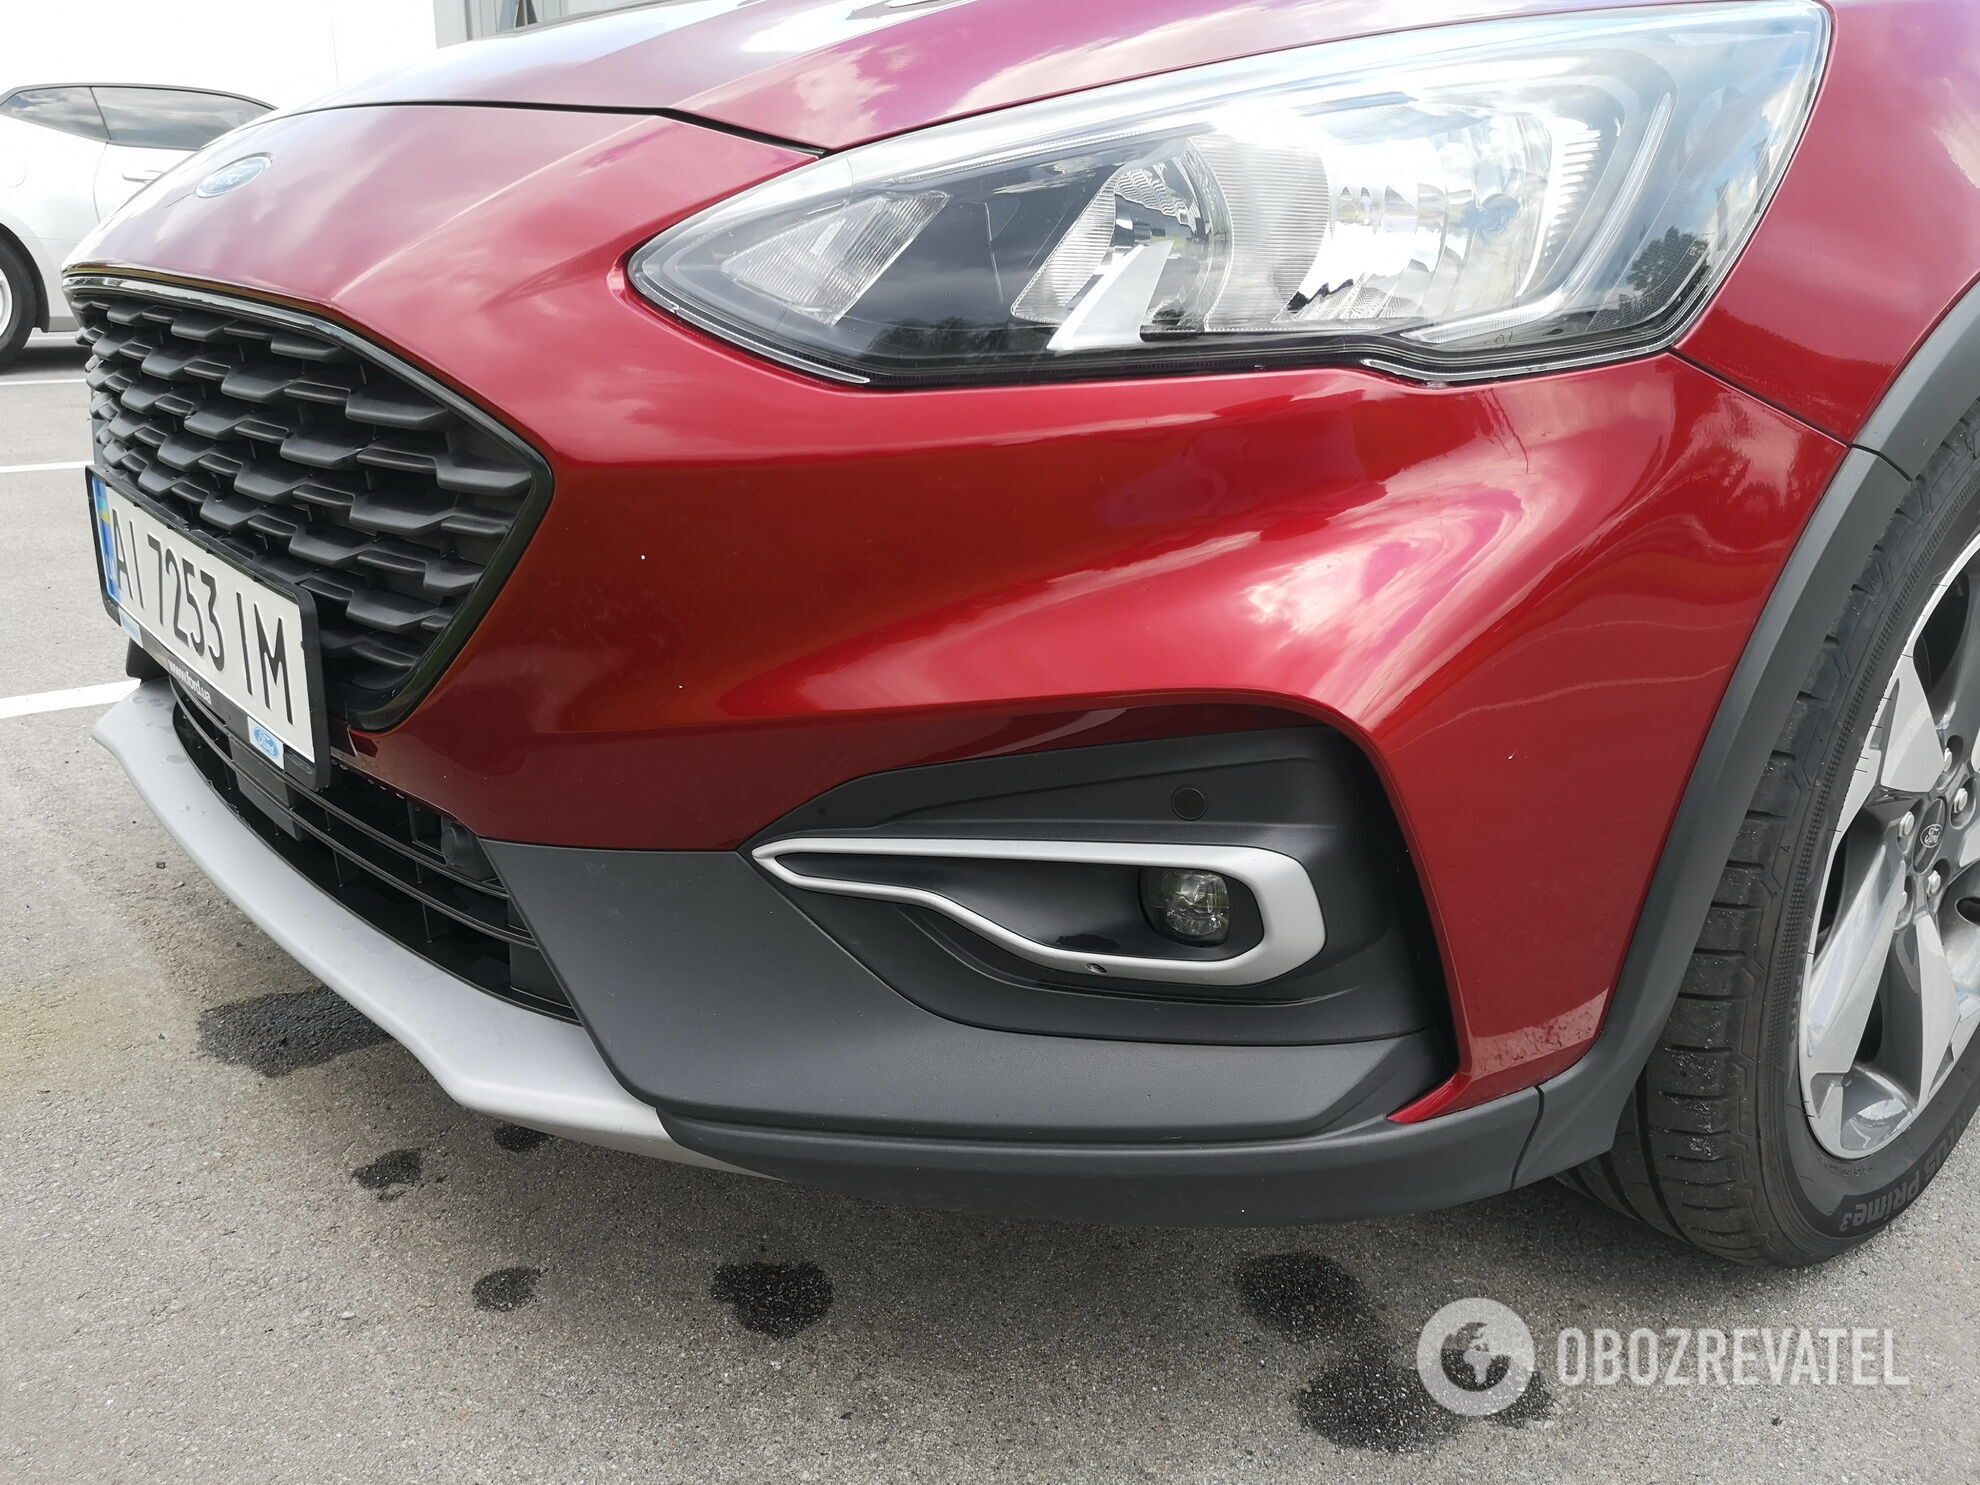 2020 Ford Focus Active. Фото: